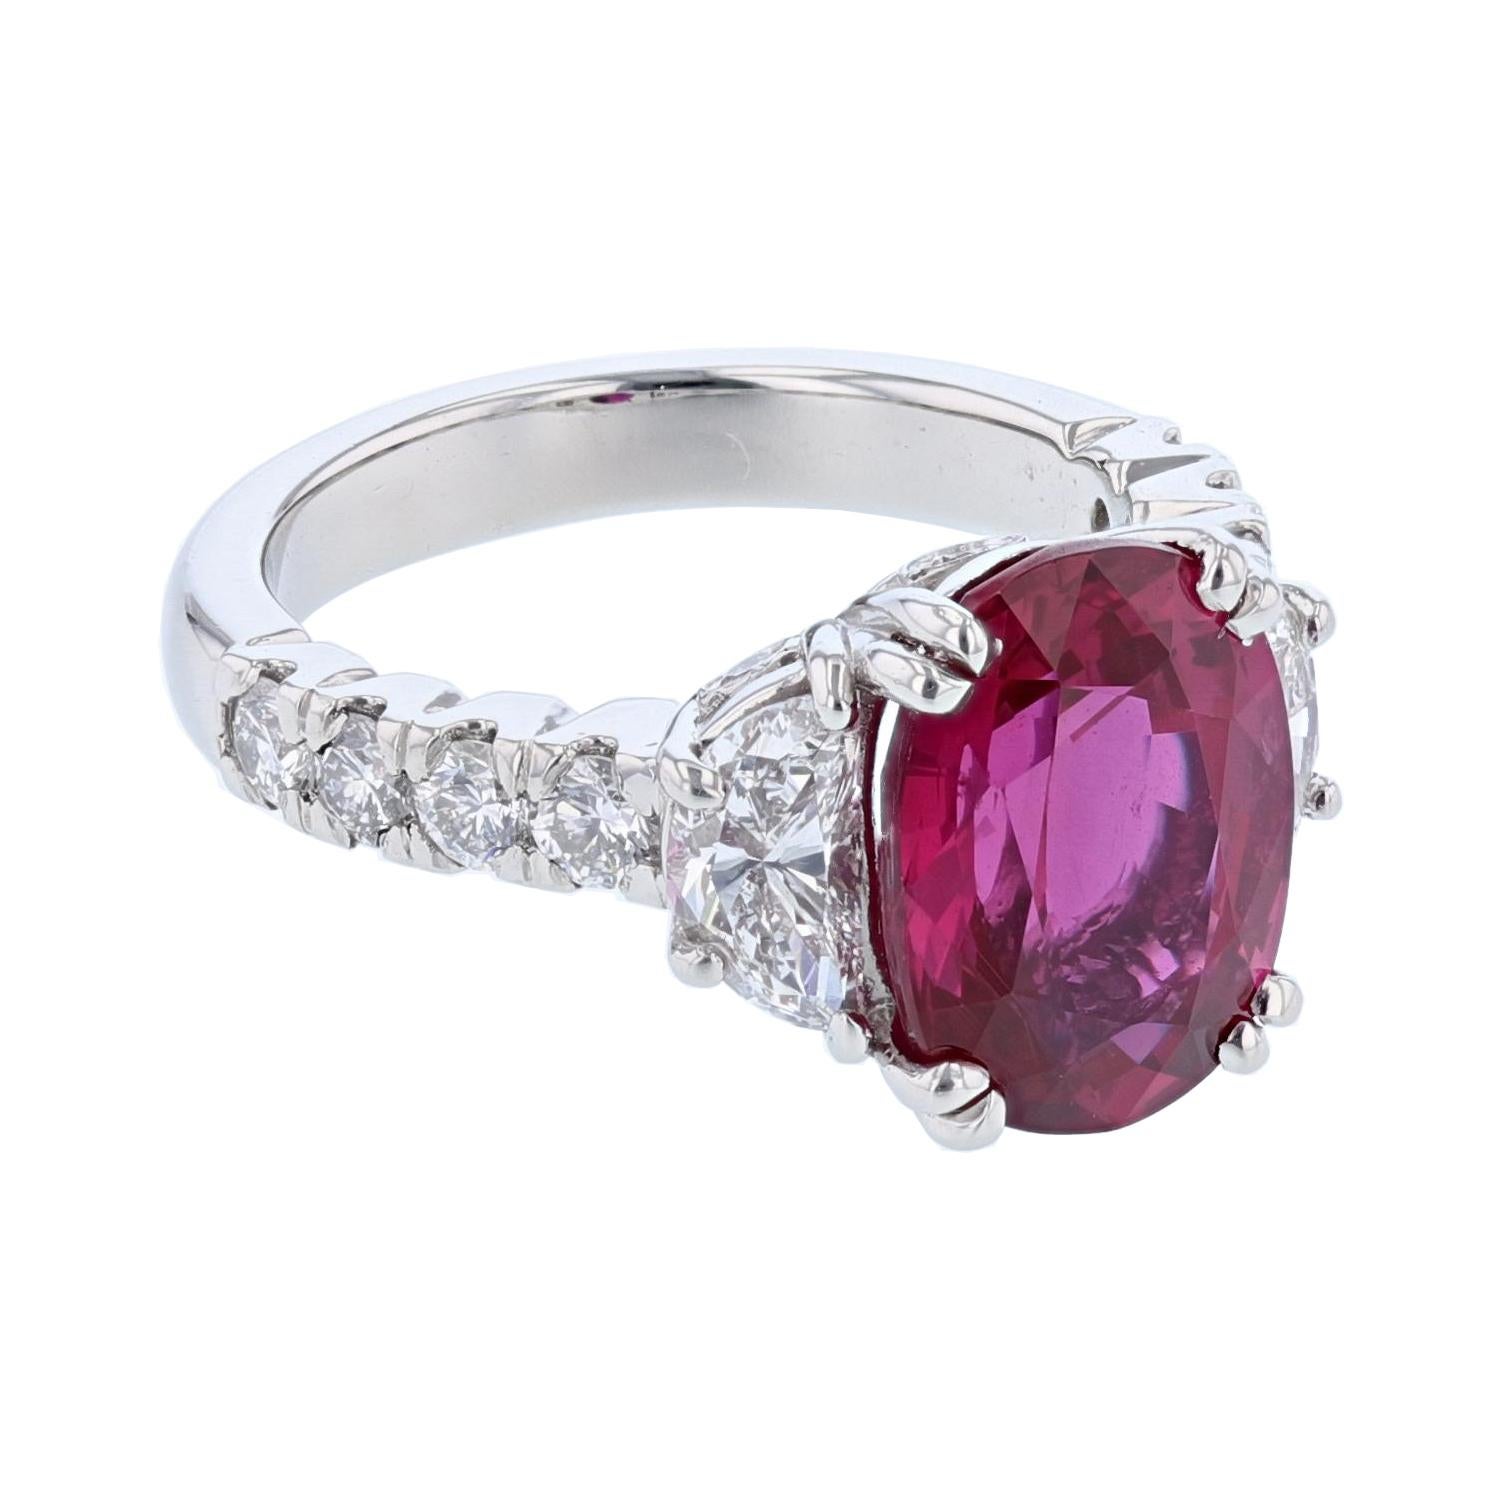 This ring is made in Platinum and features an Oval cut, Natural Mozambique Ruby weighing 5.61ct with a GRS certificate. The certificate number is 